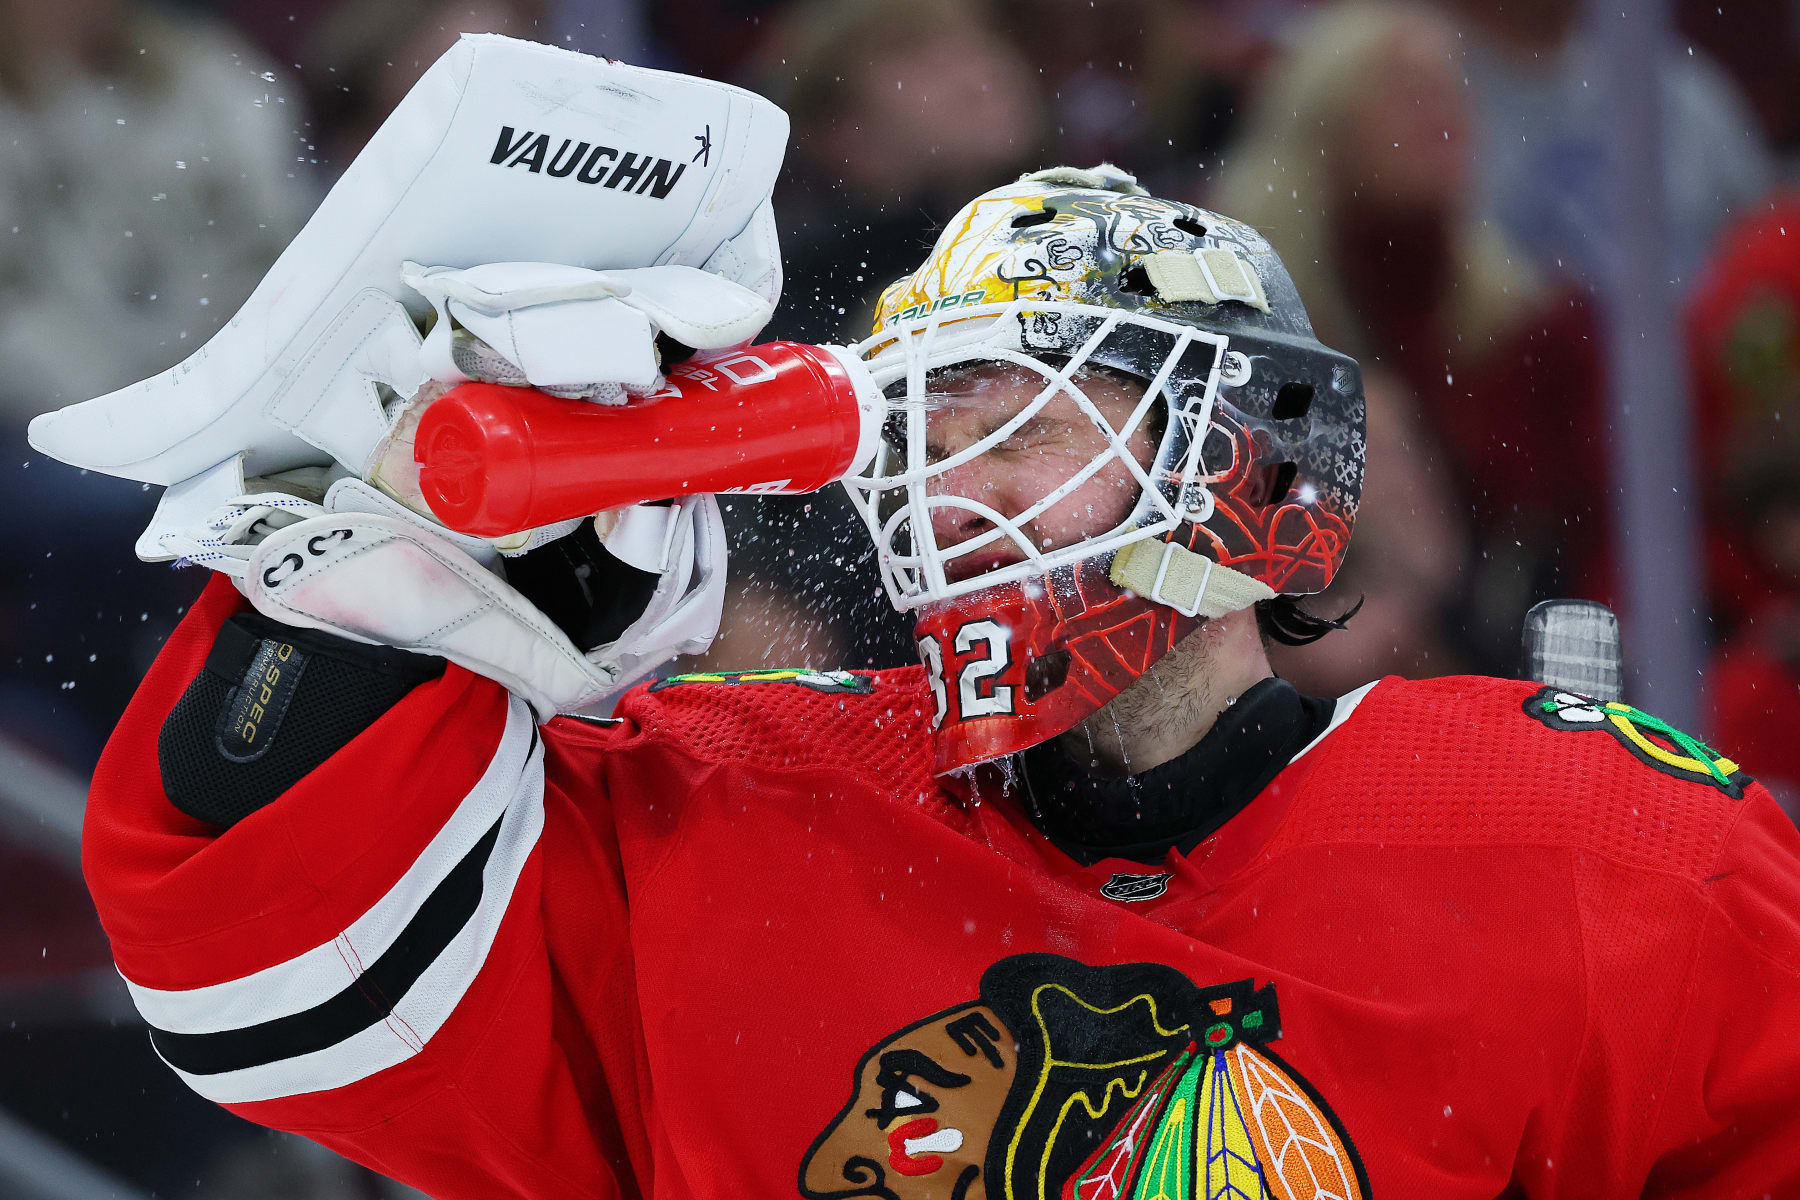 The top 10 goalies in the NHL